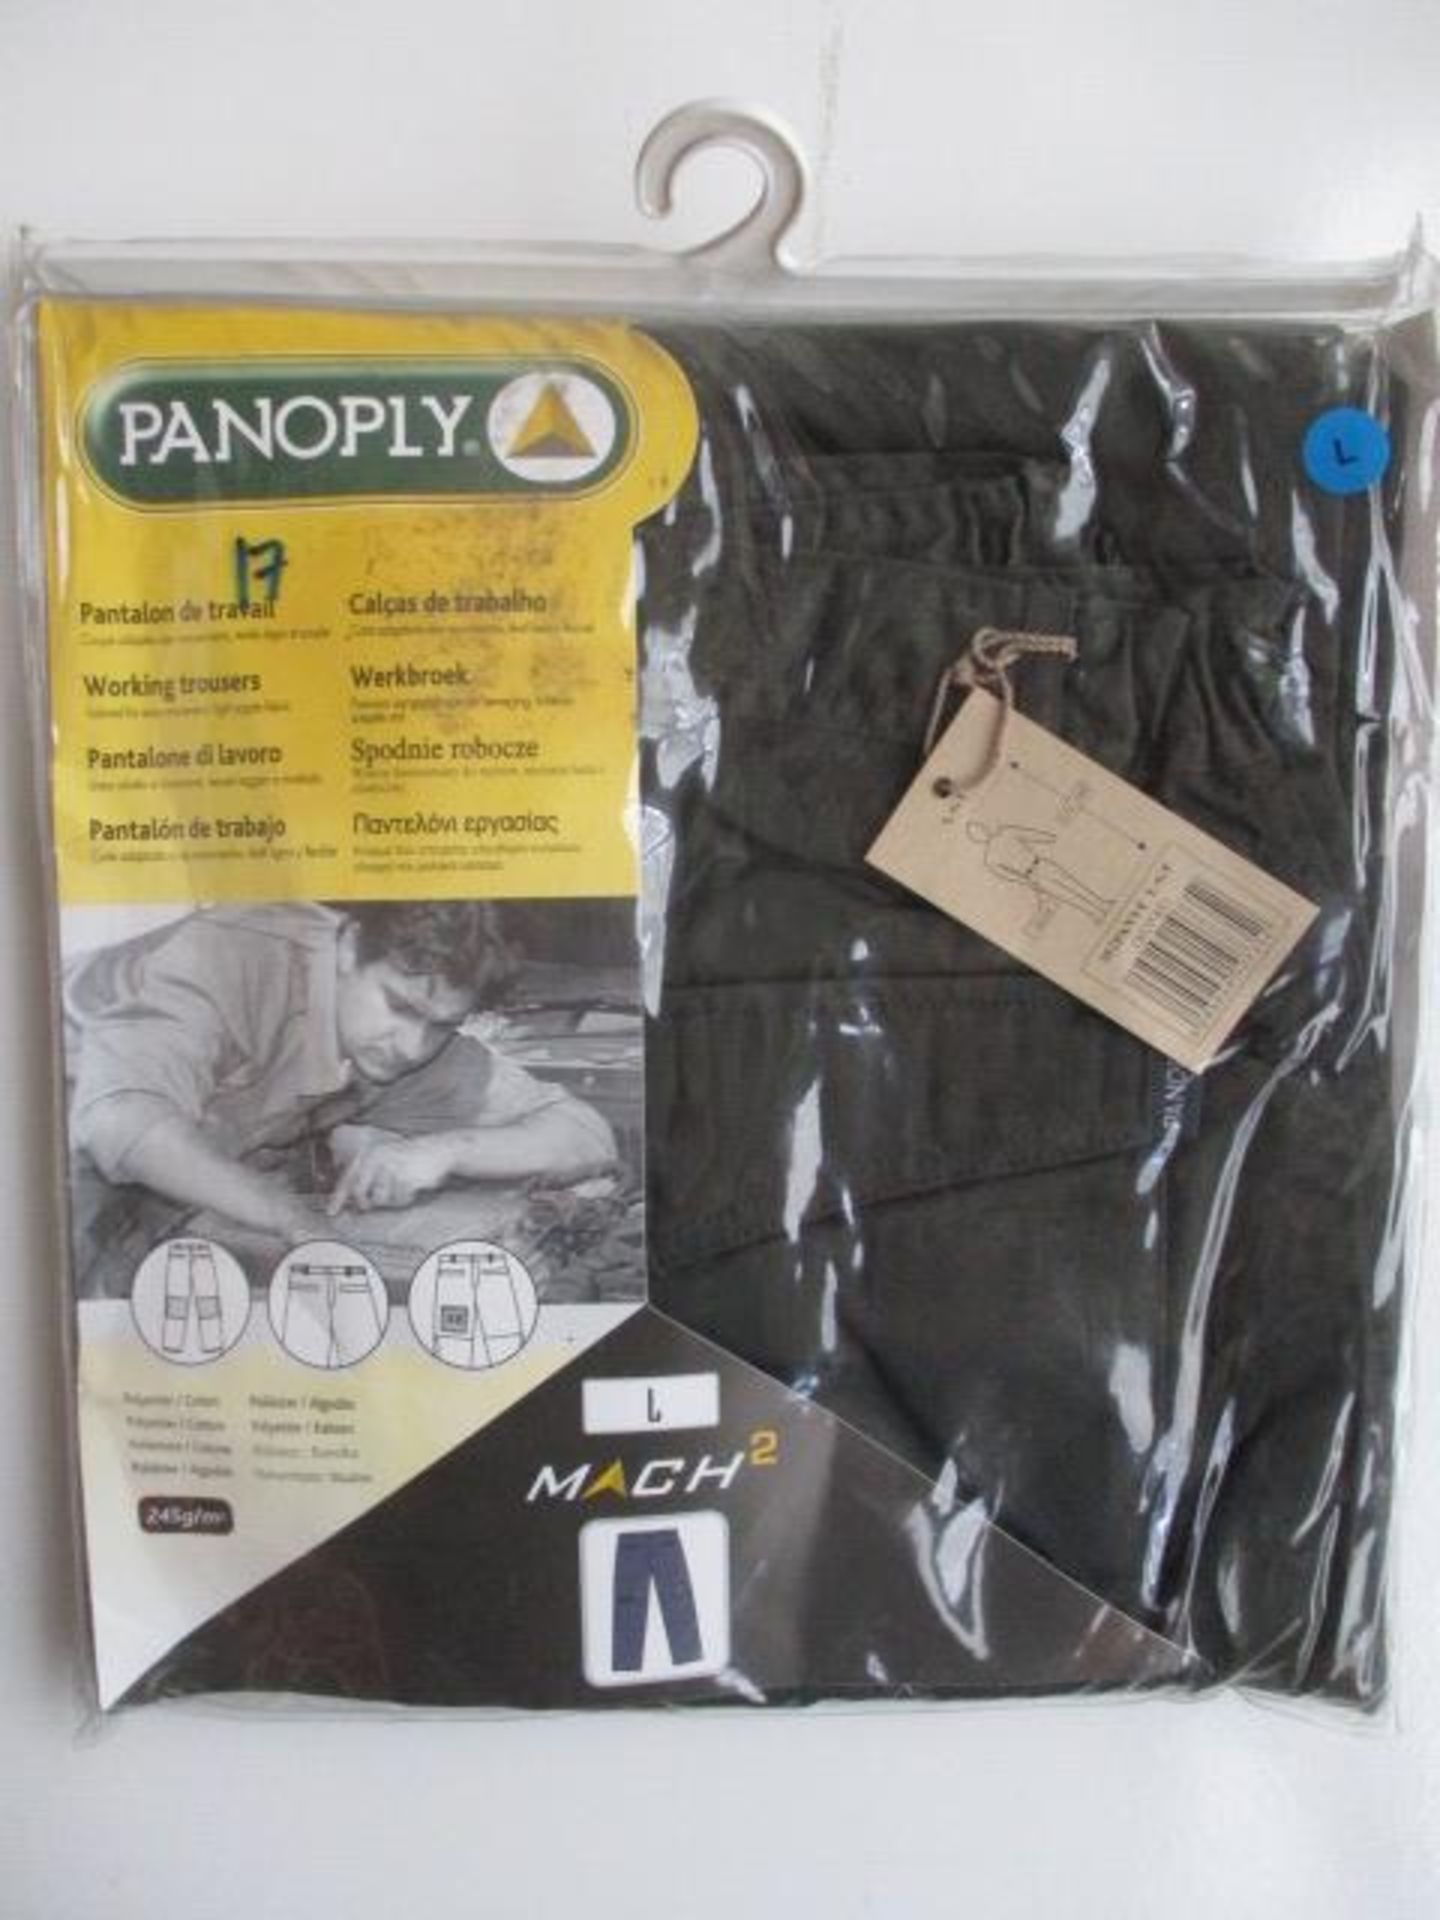 5pcs brand new and sealed Panoply workwear trousers. Panoply Mach 2 trousers size L